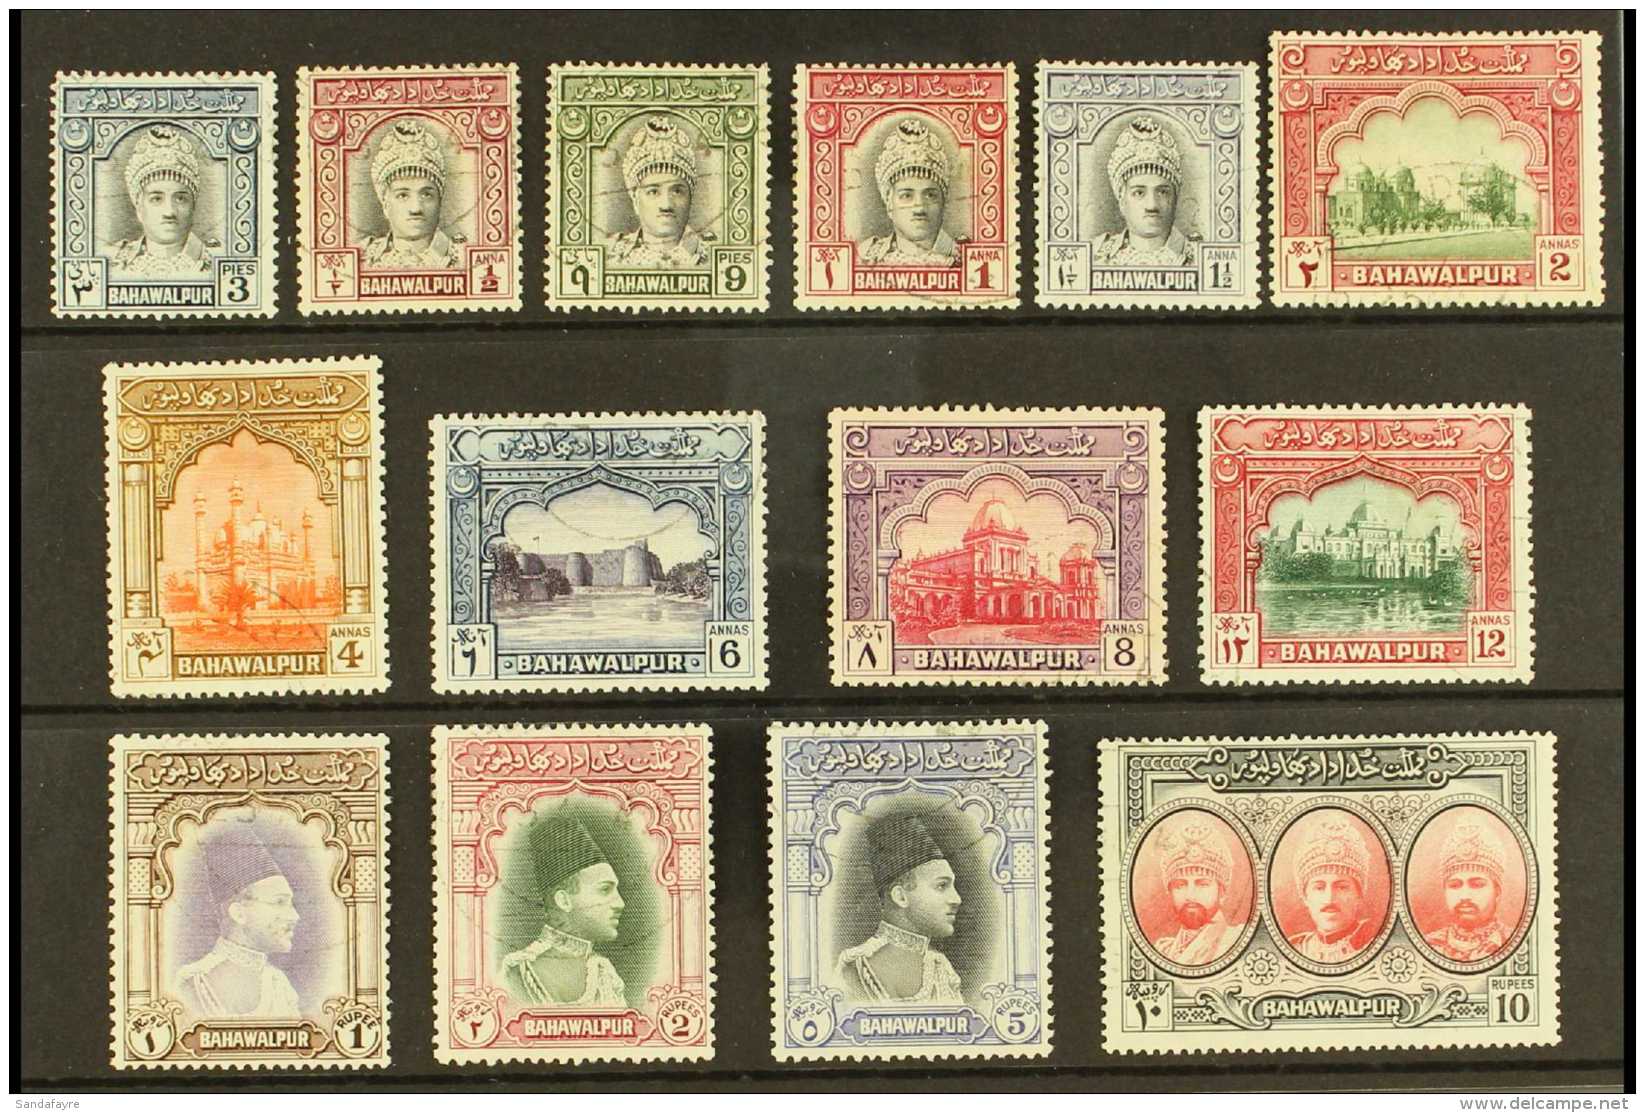 1948 (1 APR)  Complete Pictorial Definitive Set, SG 19/32, Very Fine Used, A Rare Set As Used. (14 Stamps) For... - Bahawalpur